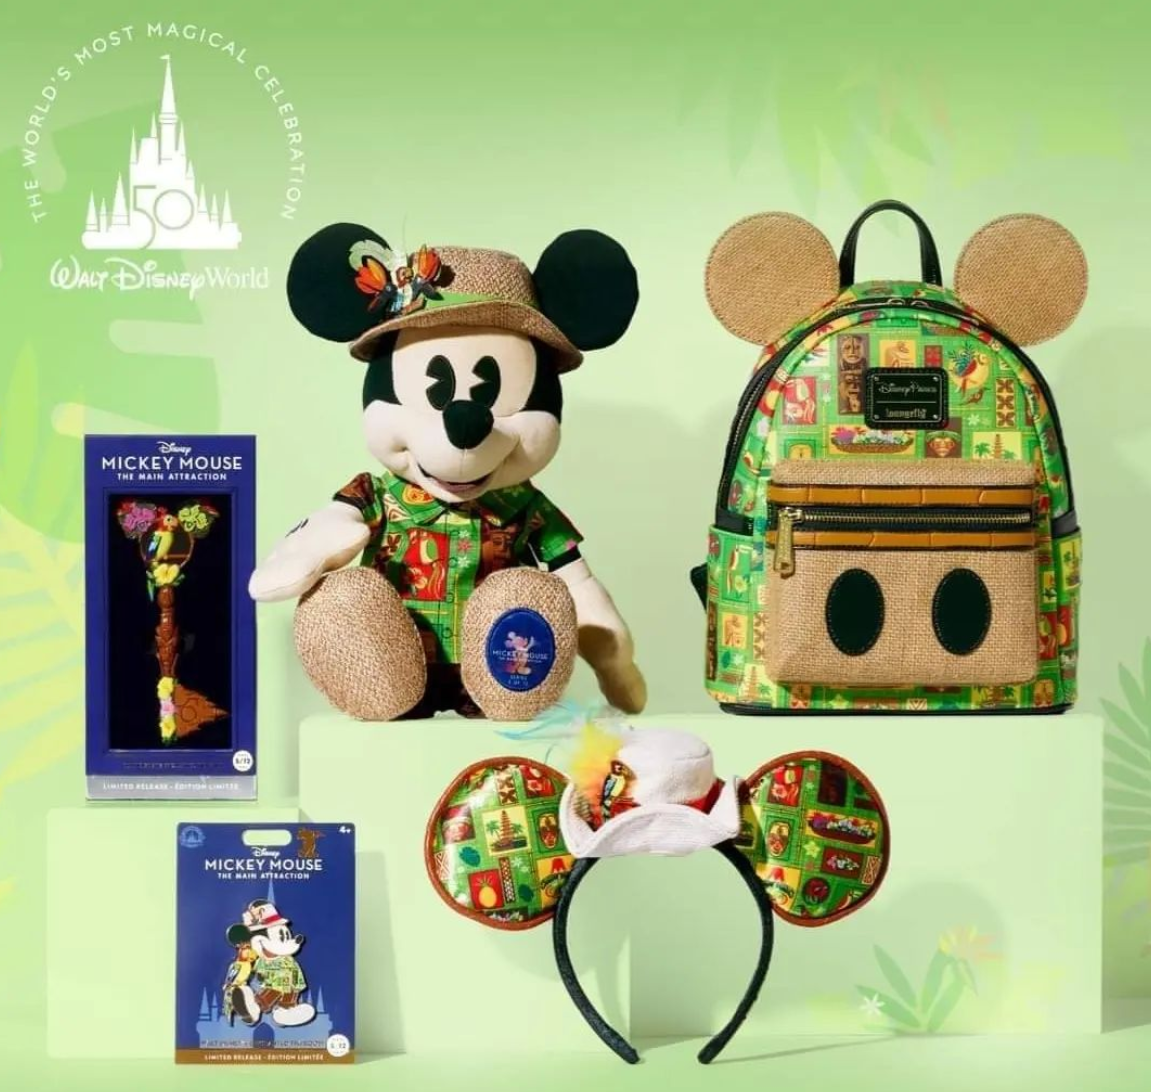 Mickey The Main Attraction Enchanted Tiki Room Collection coming to ShopDisney on July 1st